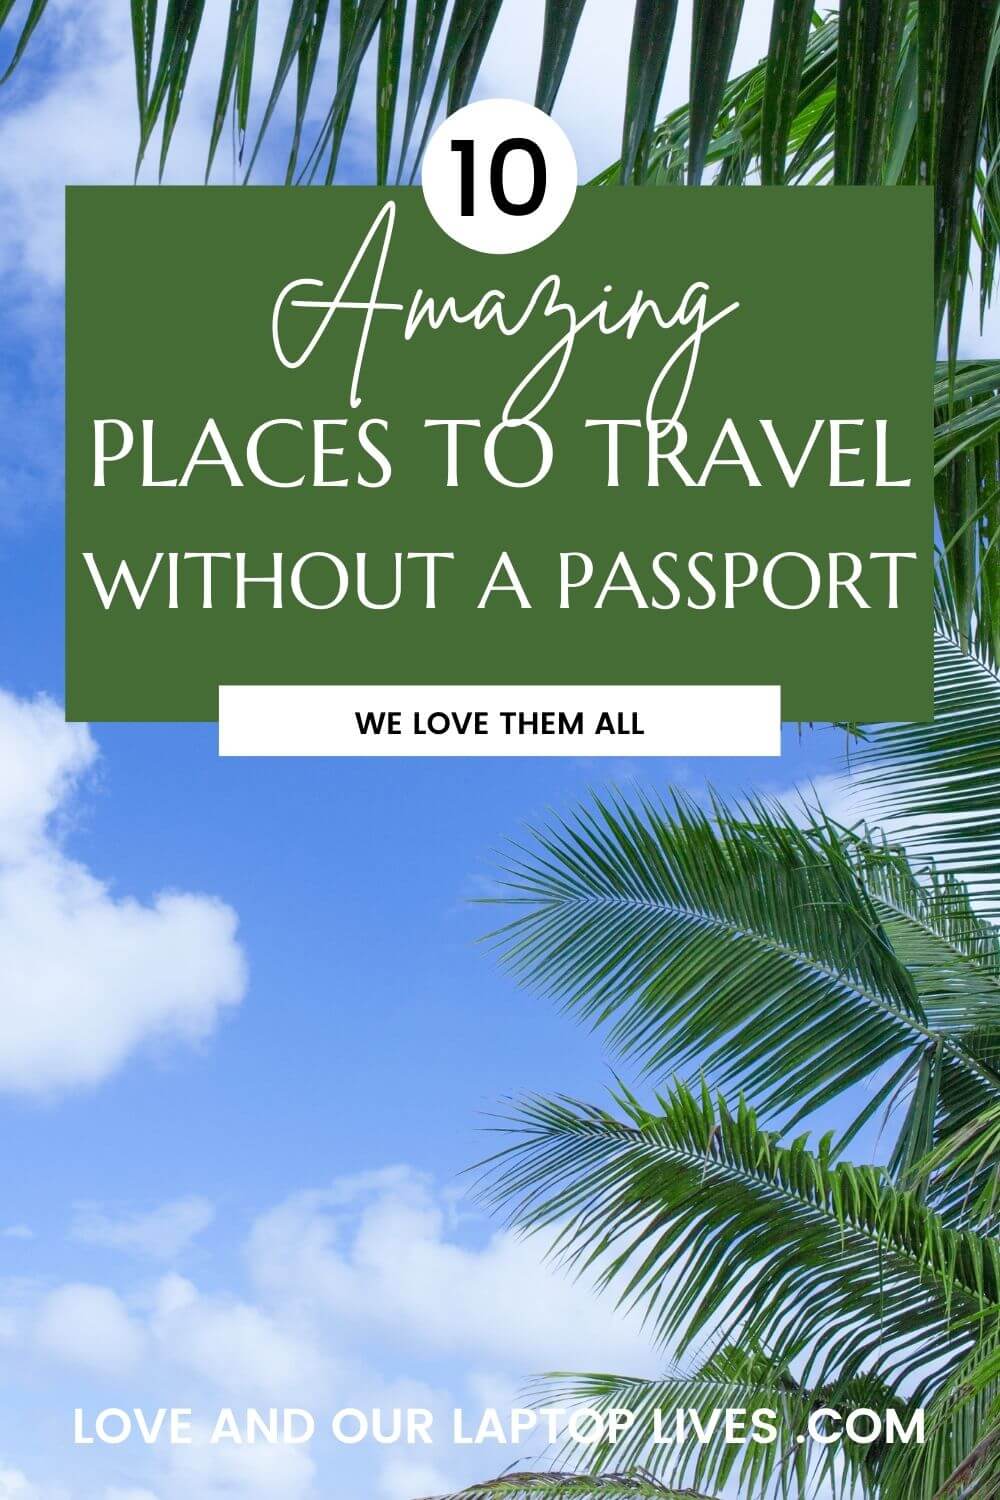 10 Amazing Places To Travel Without A Passport From The U.S. - Love And